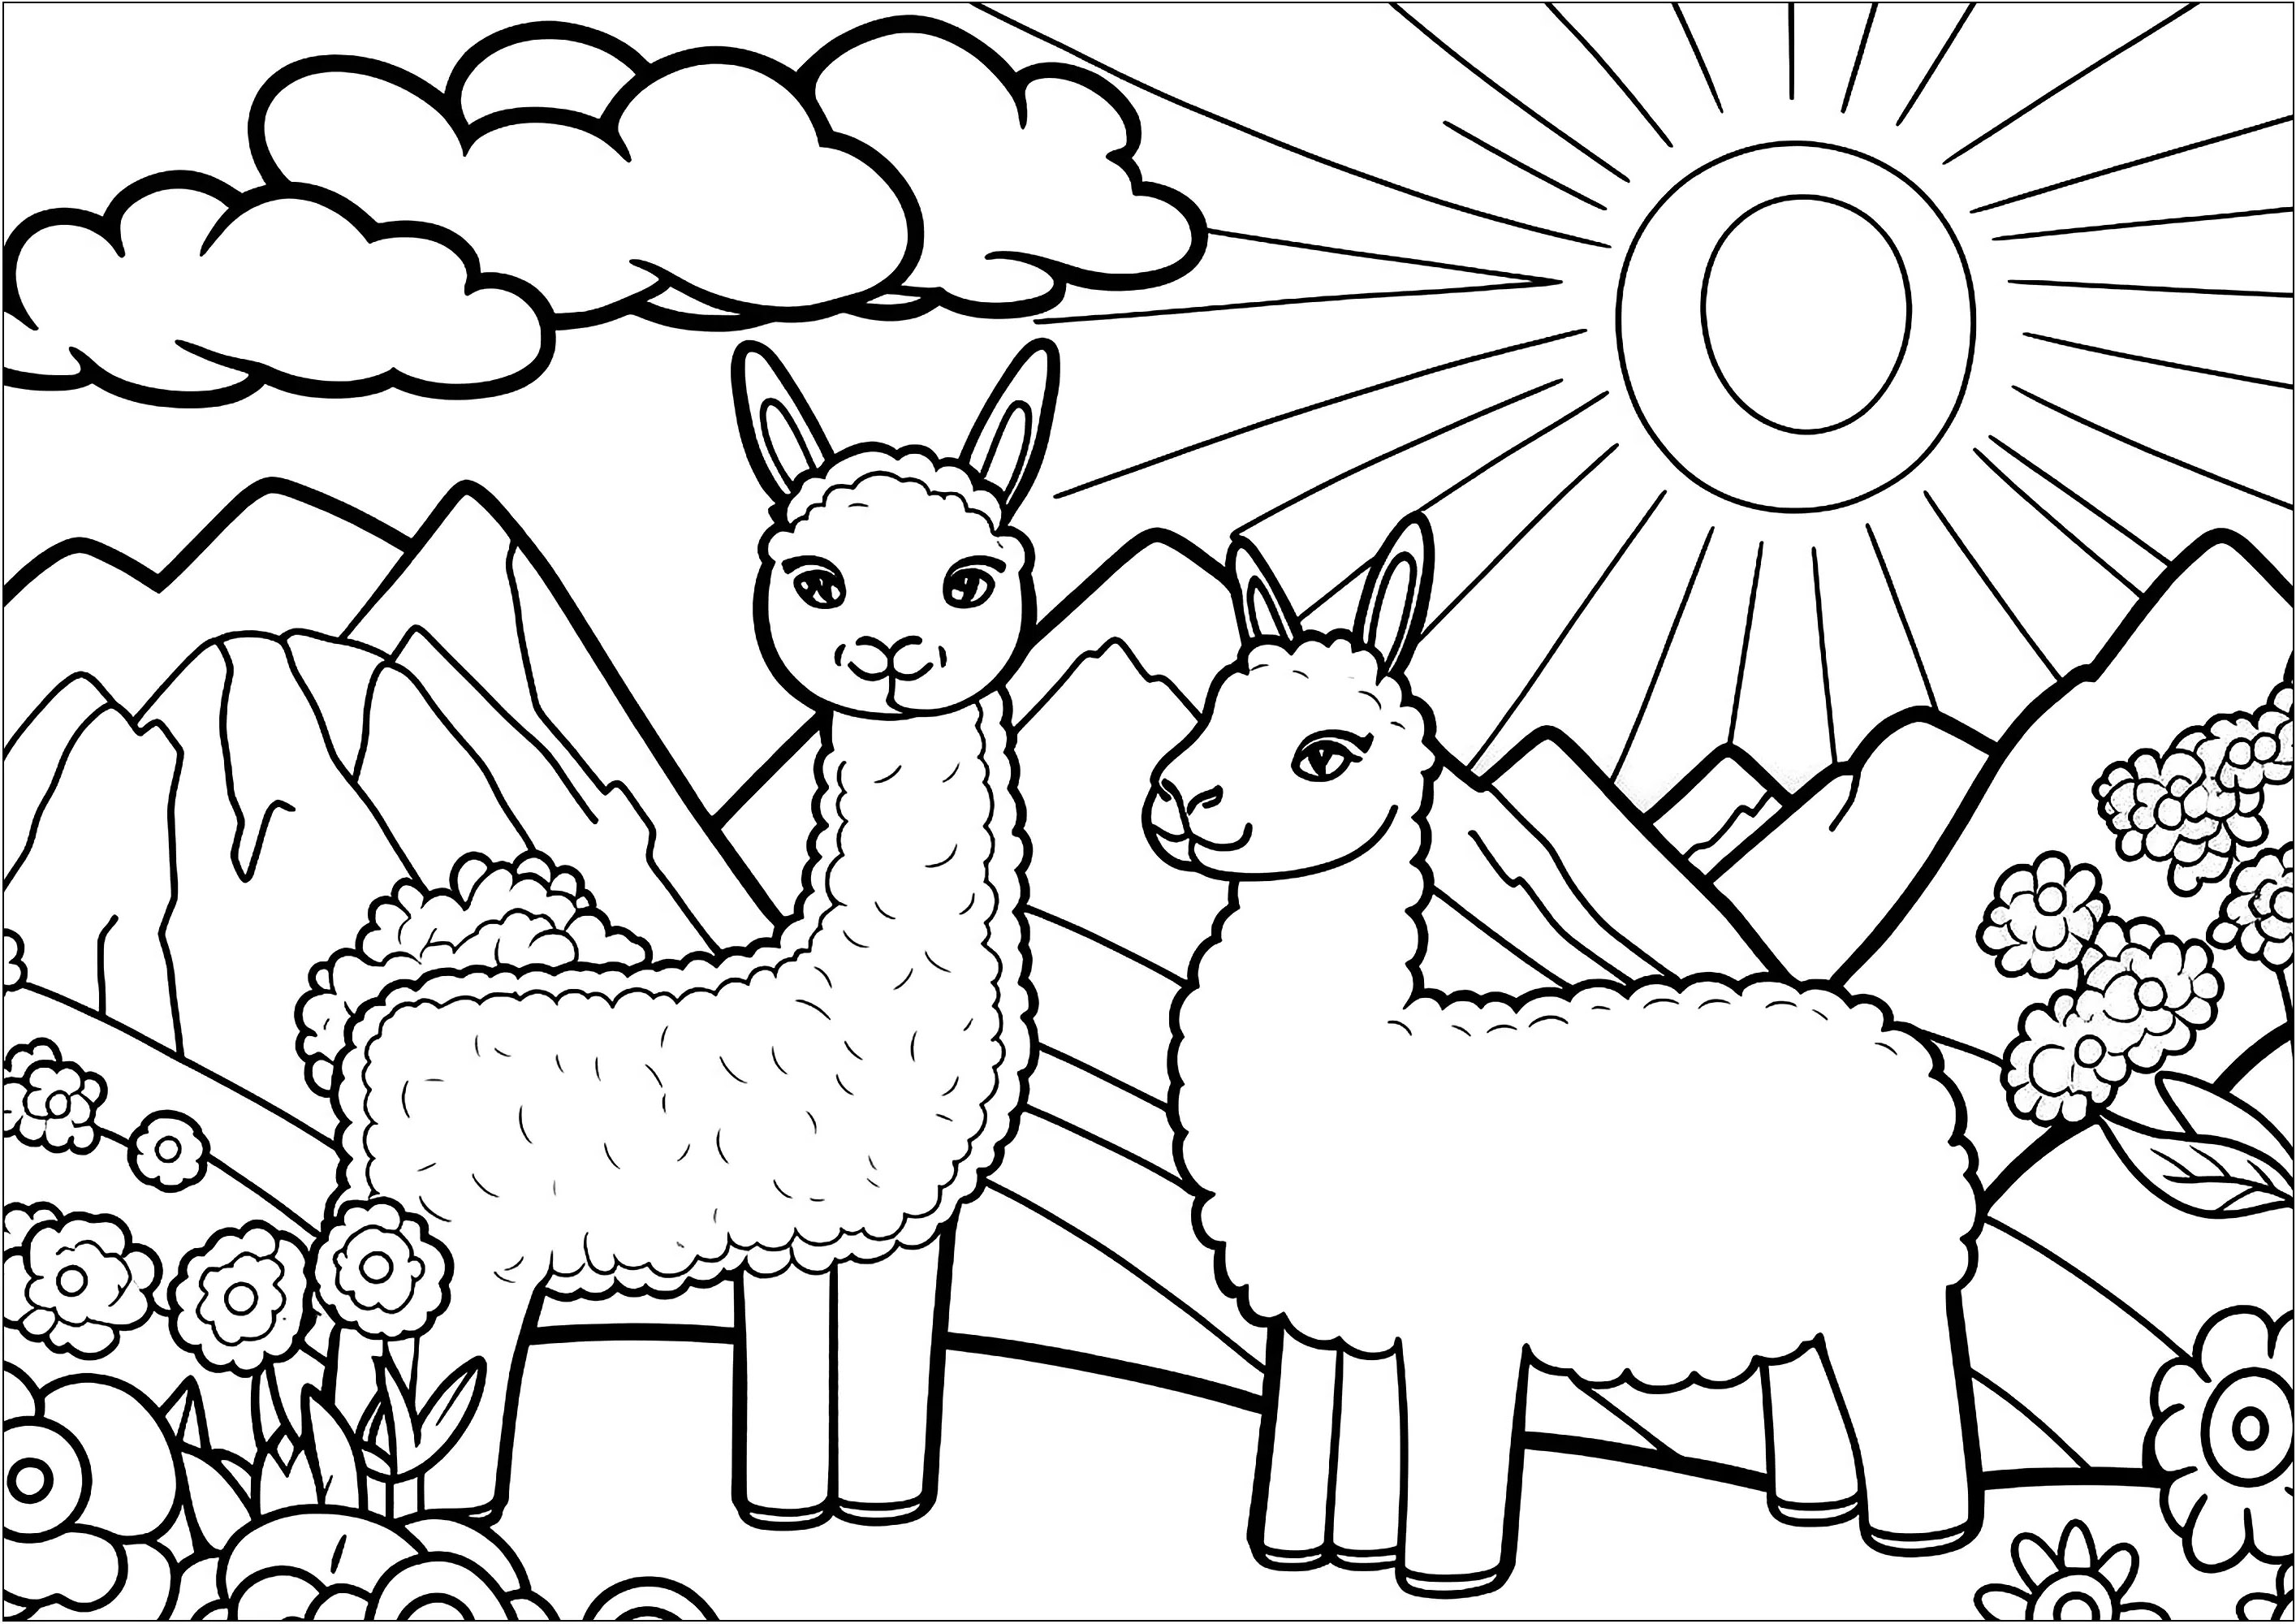 Two pretty llamas. A pretty coloring page with two llamas, but also beautiful mountains, a sun and clouds, as well as a few flowers.